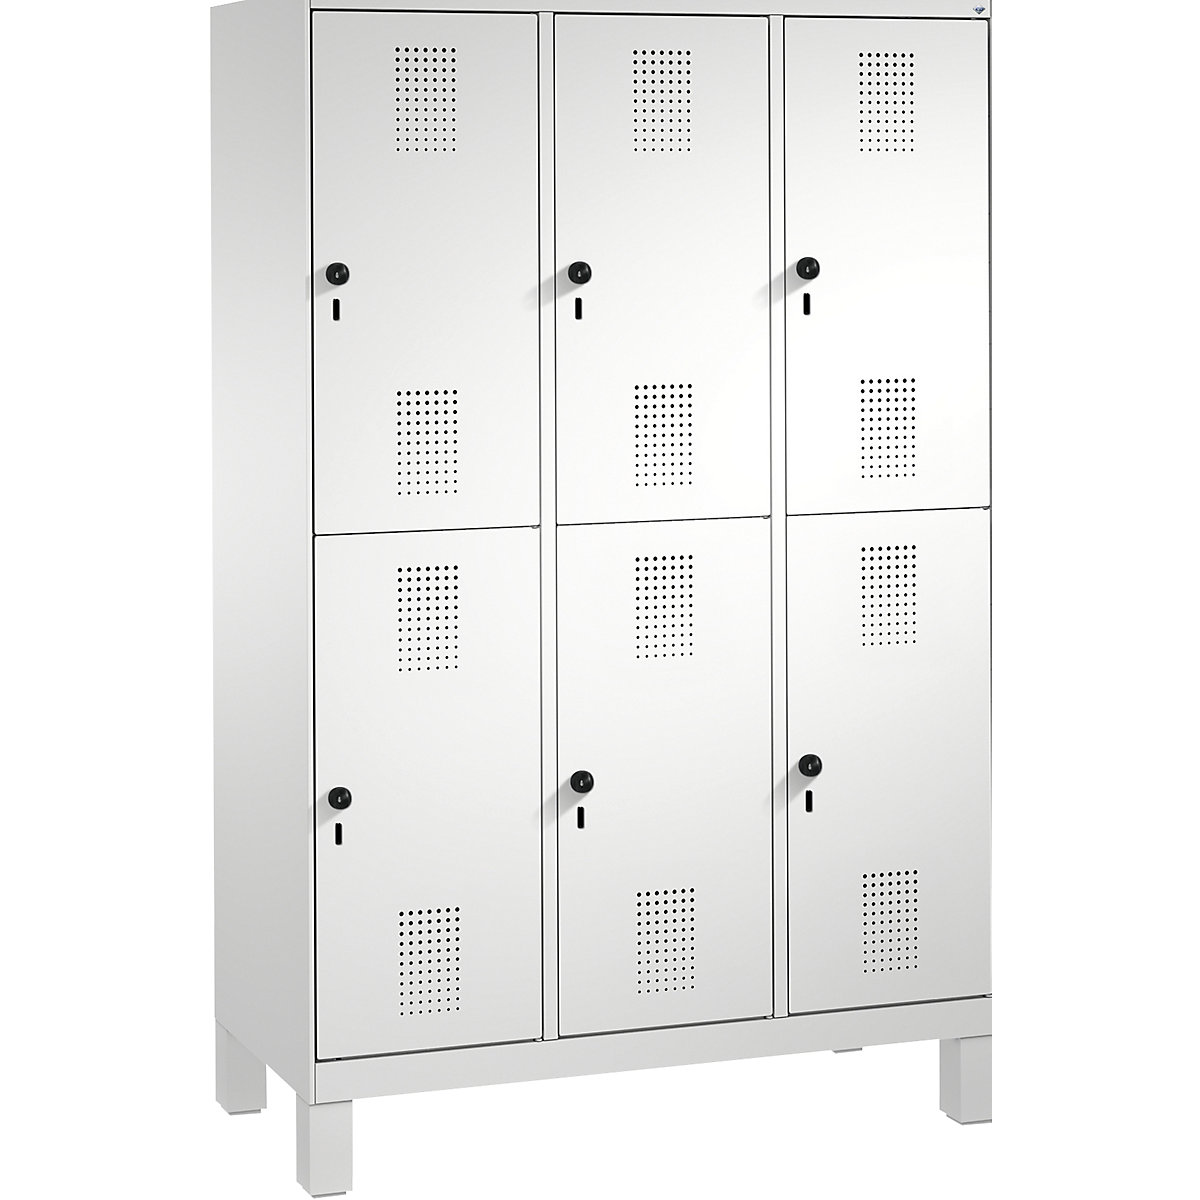 EVOLO cloakroom locker, double tier, with feet – C+P, 3 compartments, 2 shelf compartments each, compartment width 400 mm, light grey-10